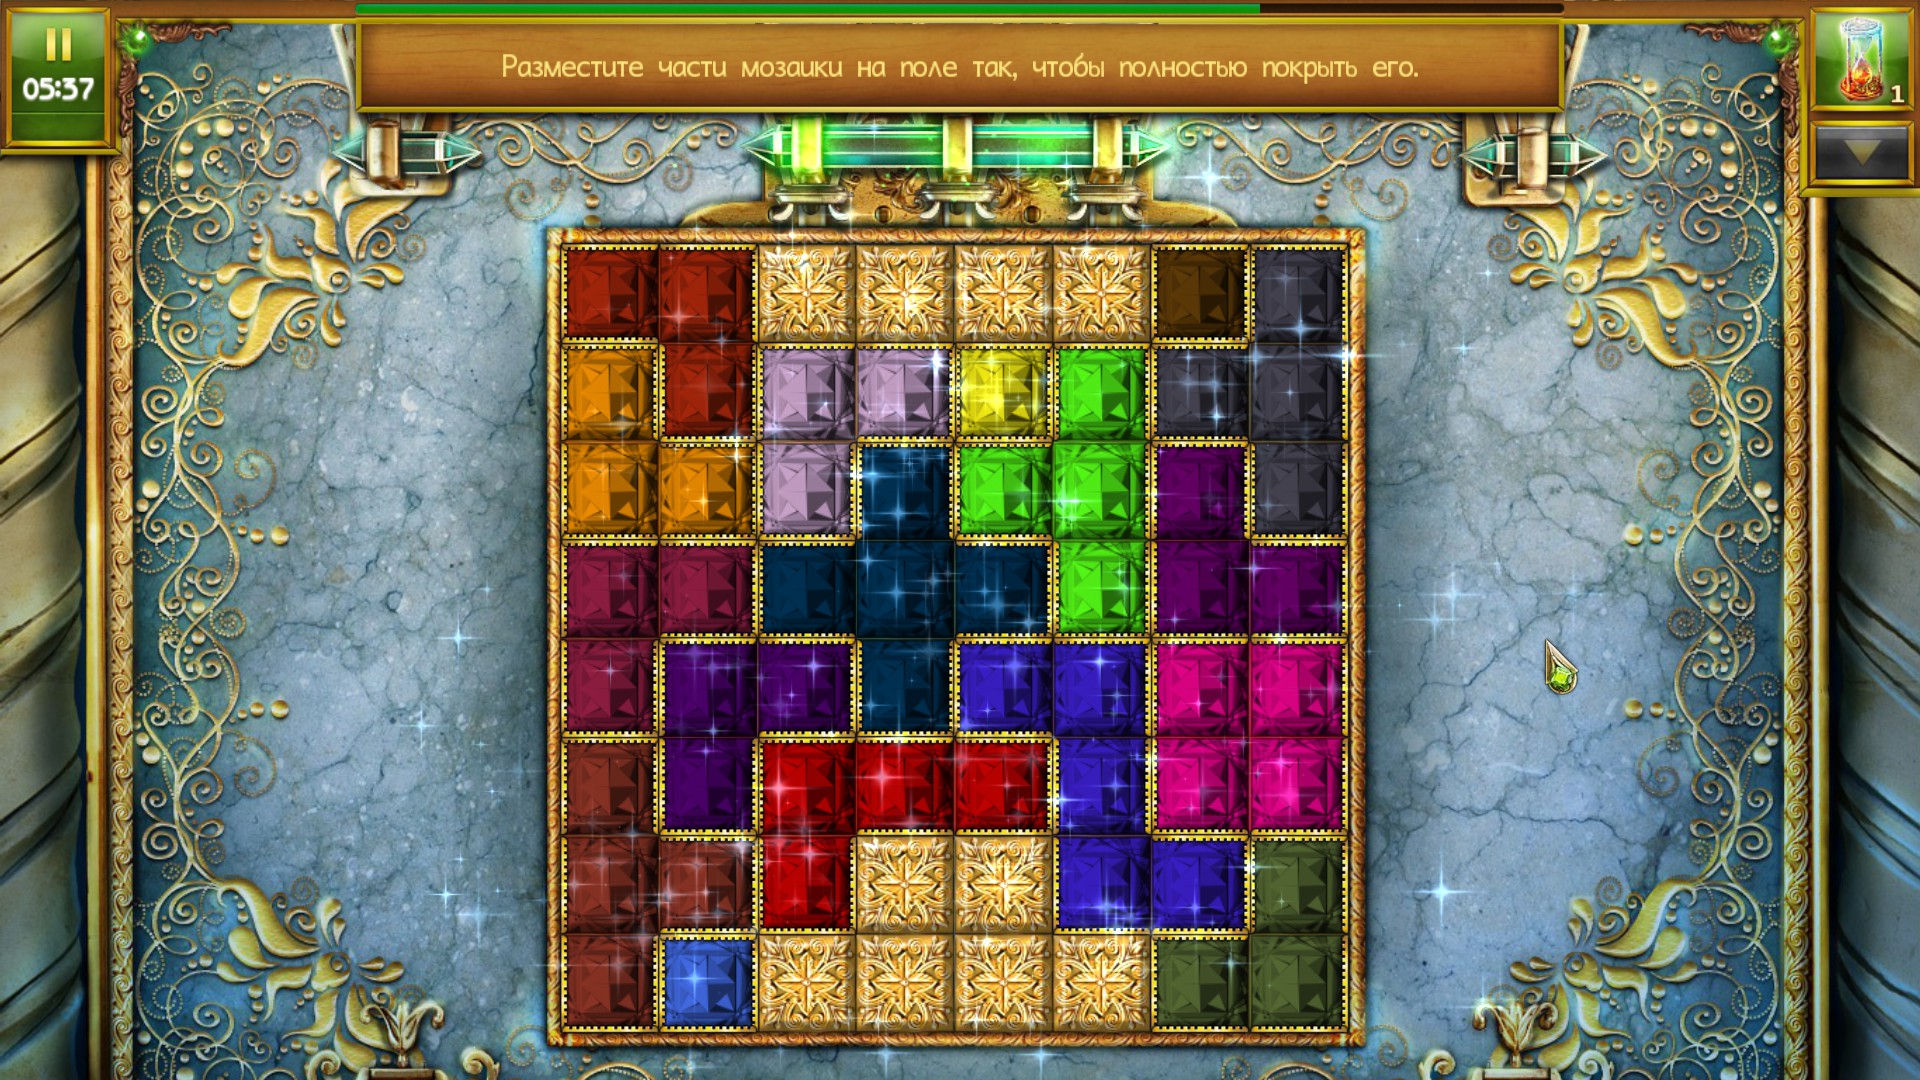 for iphone instal Lost Lands: Mahjong free